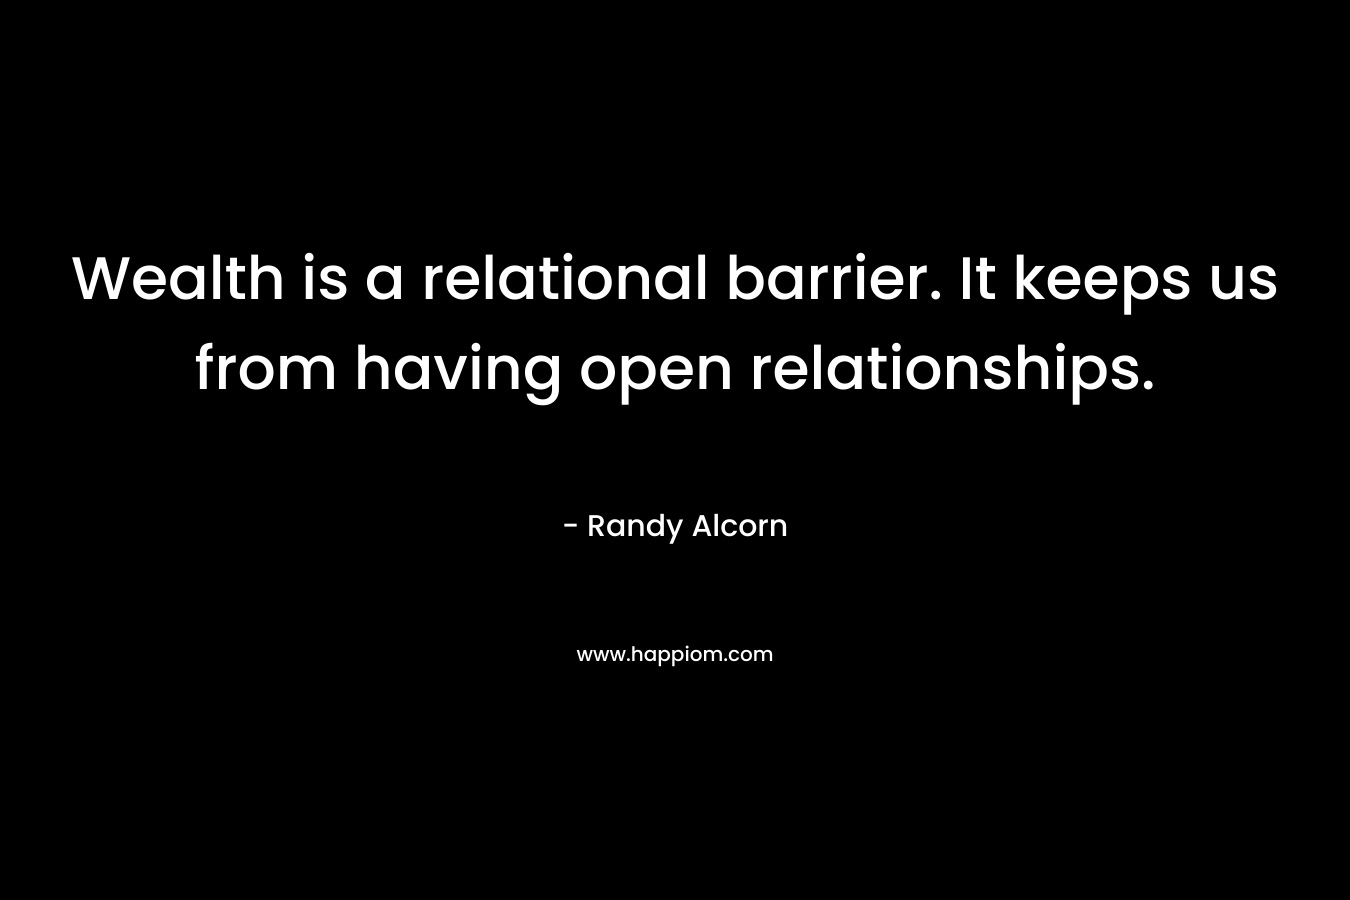 Wealth is a relational barrier. It keeps us from having open relationships.